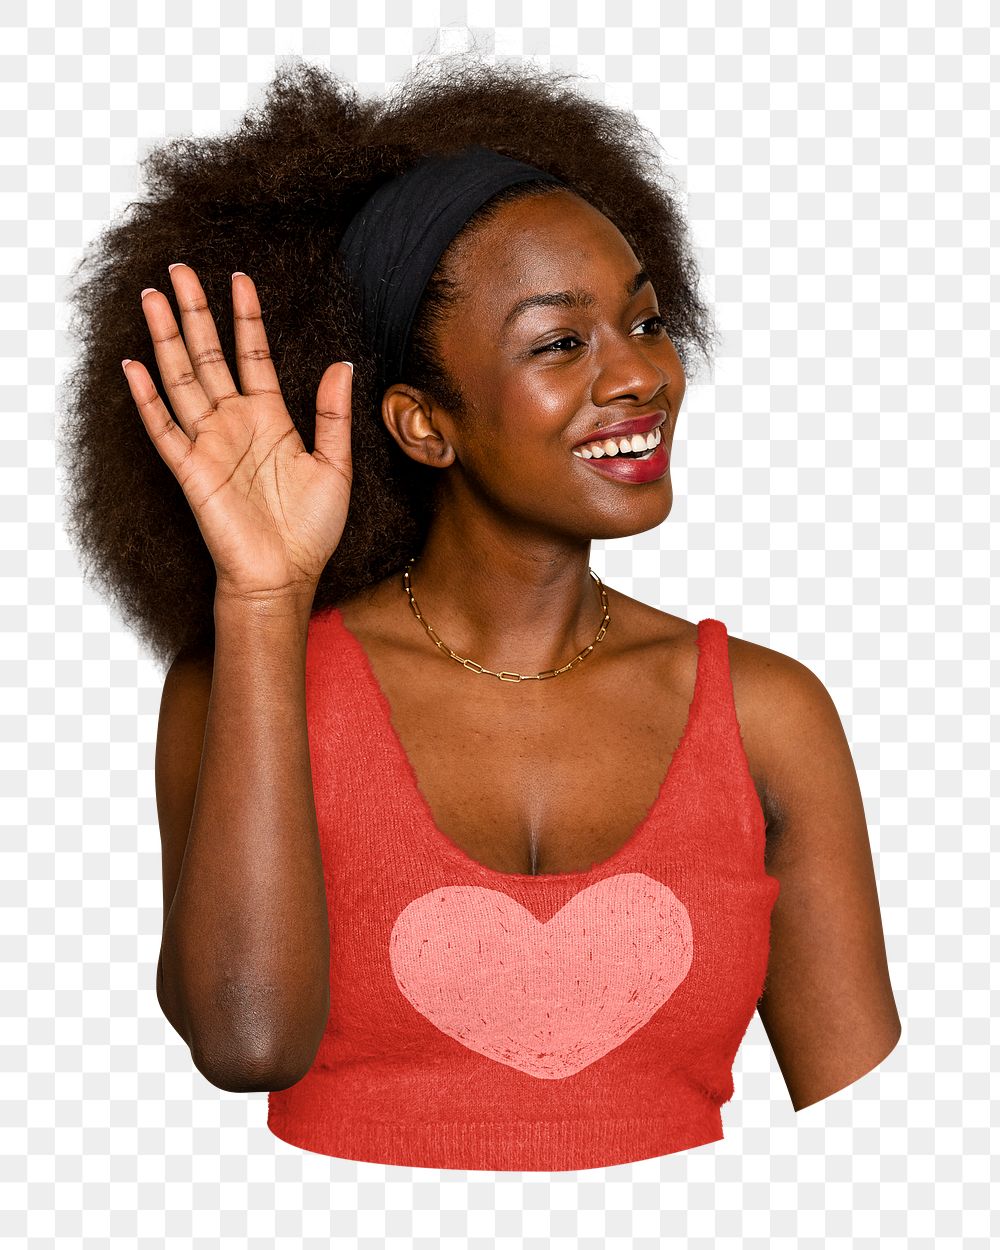 Png greeting gesture sticker, African American woman, transparent background